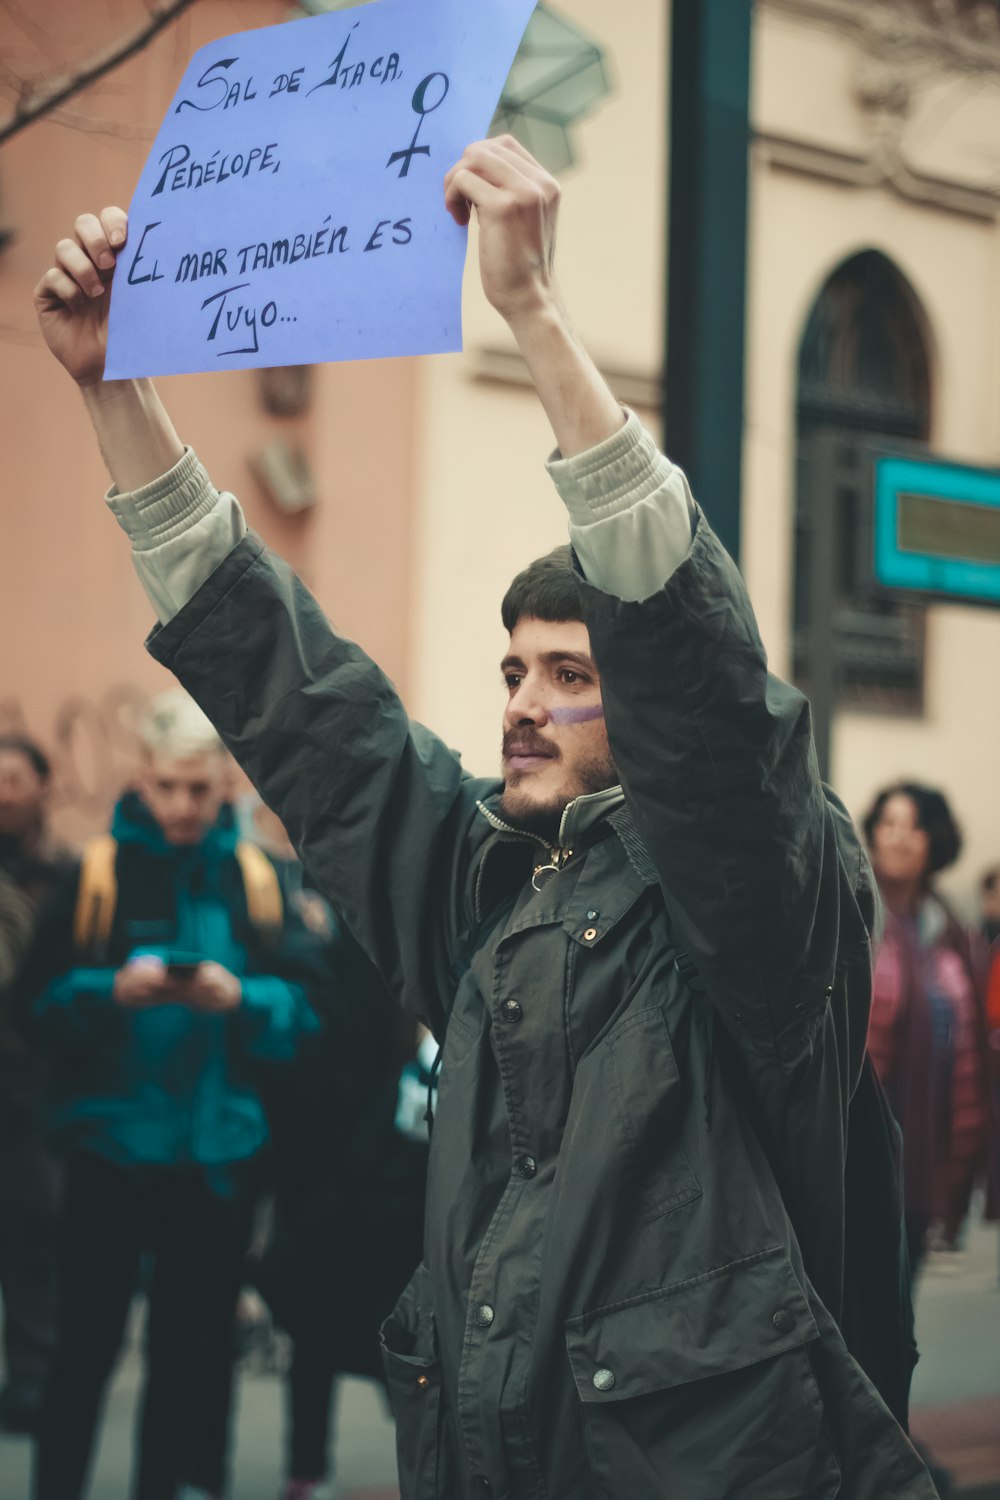 man in grey jacket holding blue placard